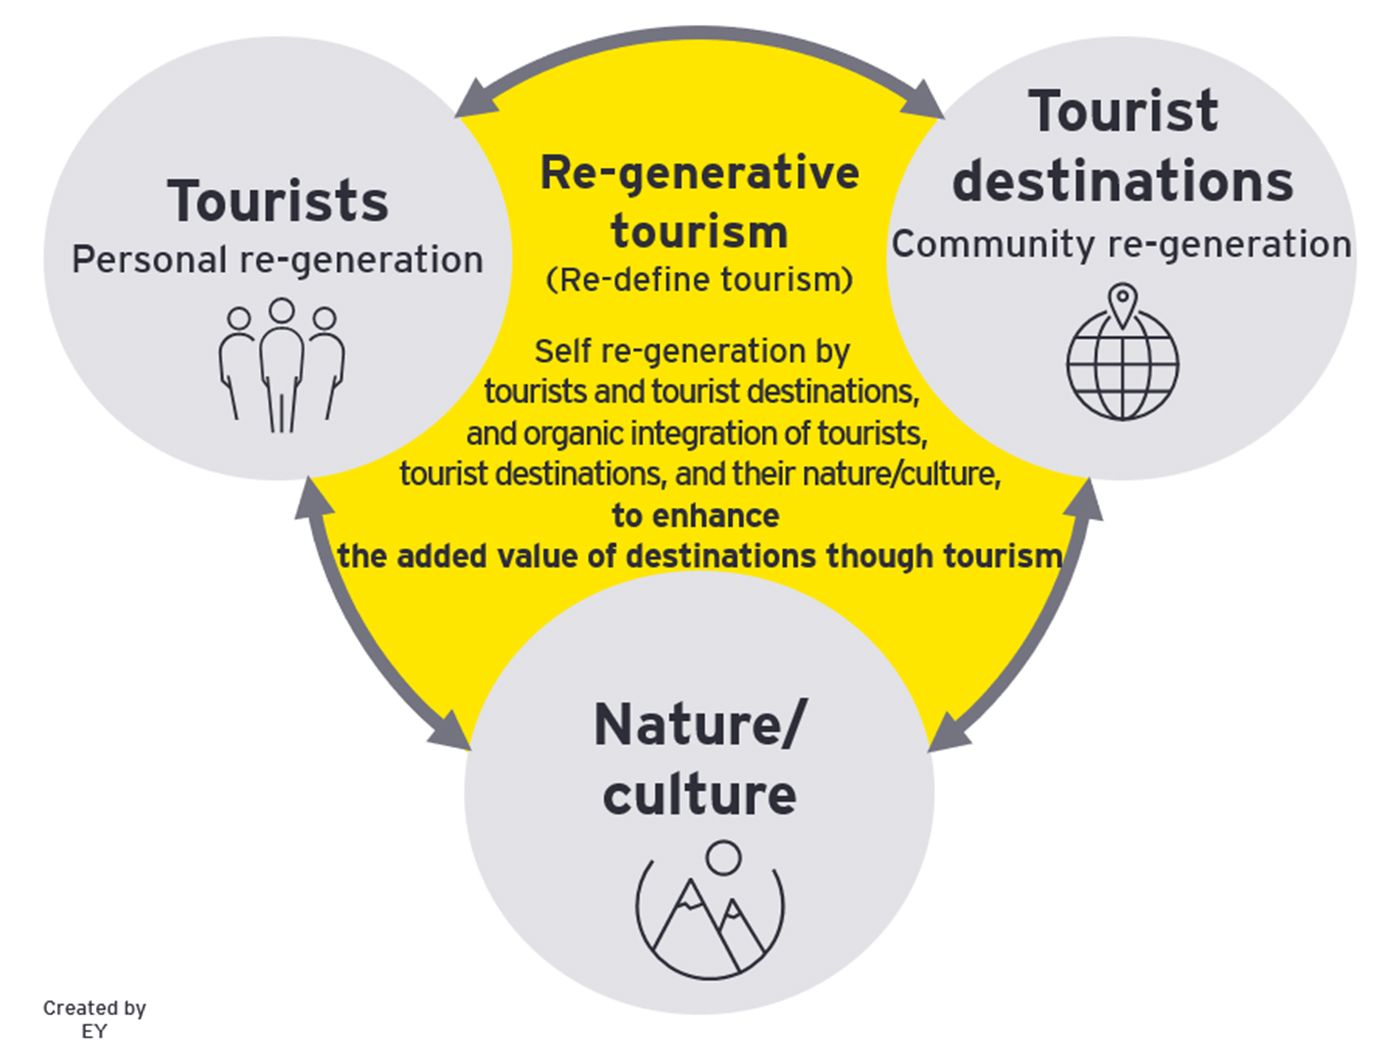 tourism has revolved around the provision of services based on tourists’ needs and regional assets